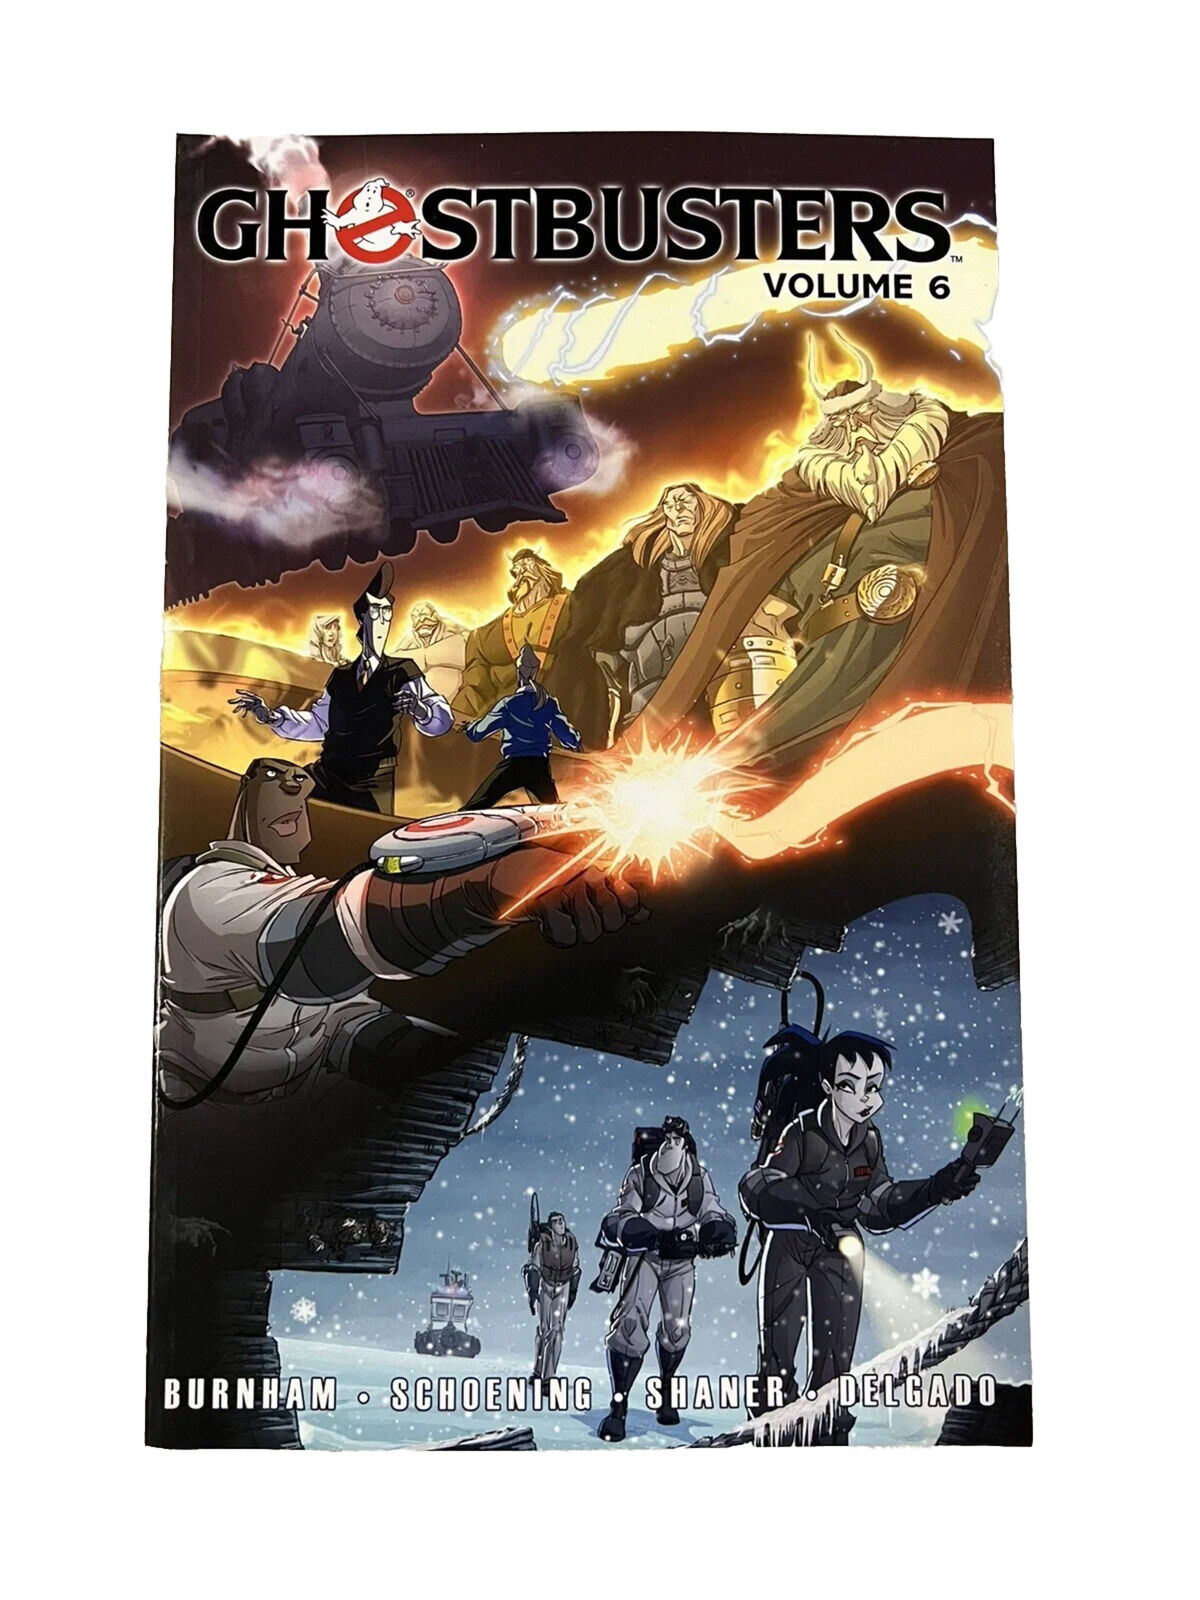 Ghostbusters Vol 6 Trains Brains And Ghostly Remains Graphic Novel Tpb Omnibus